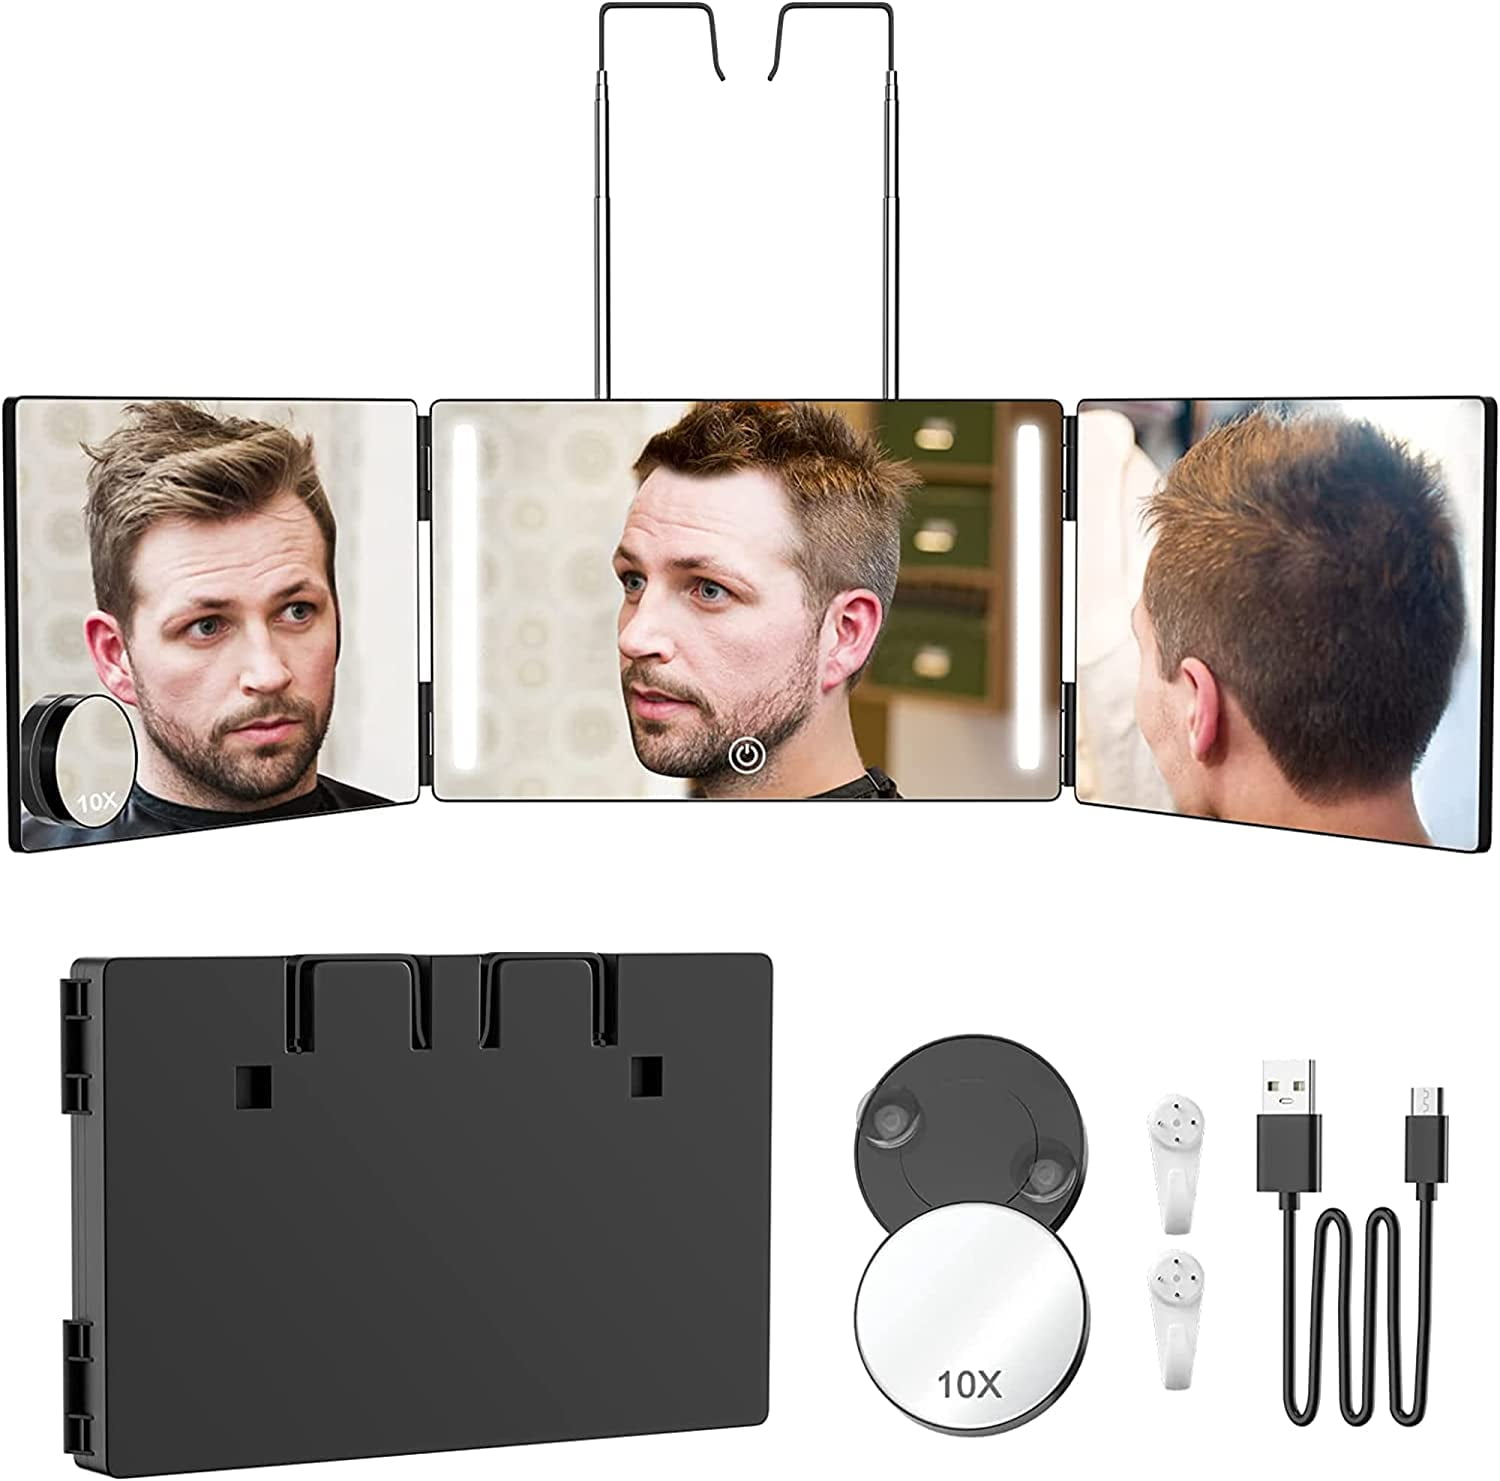 The Barbering Co. 3 Way Mirror - Real Glass | Trifold Mirror for Self Hair  Cutting & Styling | DIY Haircut Tool to Cut, Trim, or Shave Your Head 